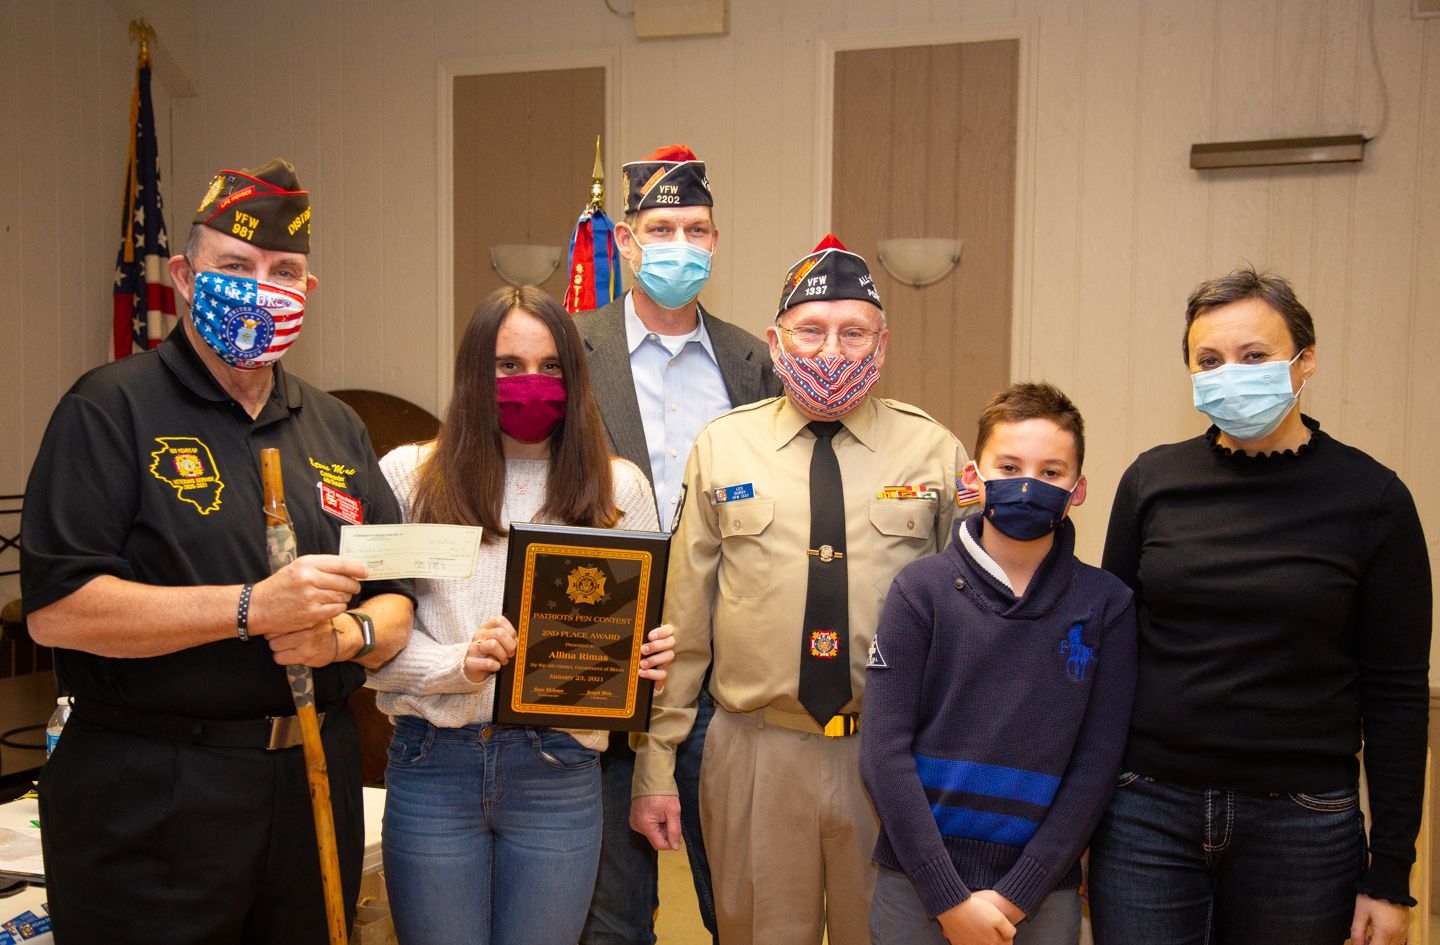 District 4 Commander Steve MacInnes and PP Chairman Joe Wein  presents Alina Rimas and award for winning the patriot Pen contest at the district level.